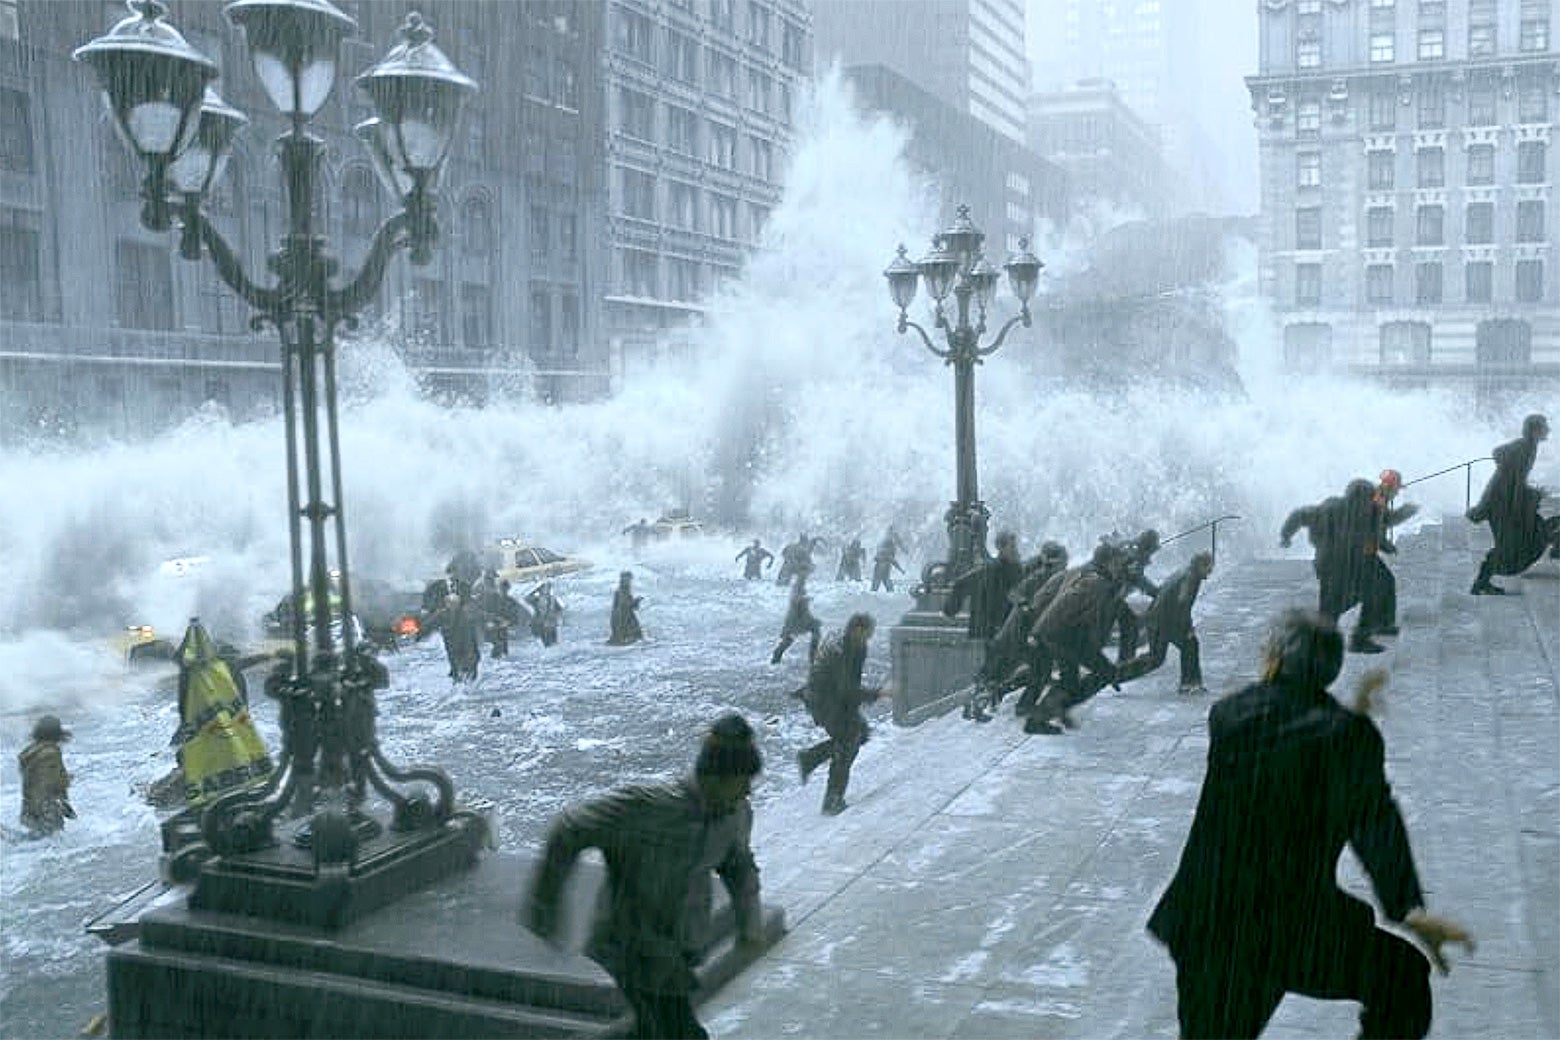 A wave hurtles down a street with tall buildings as people run in all directions. 